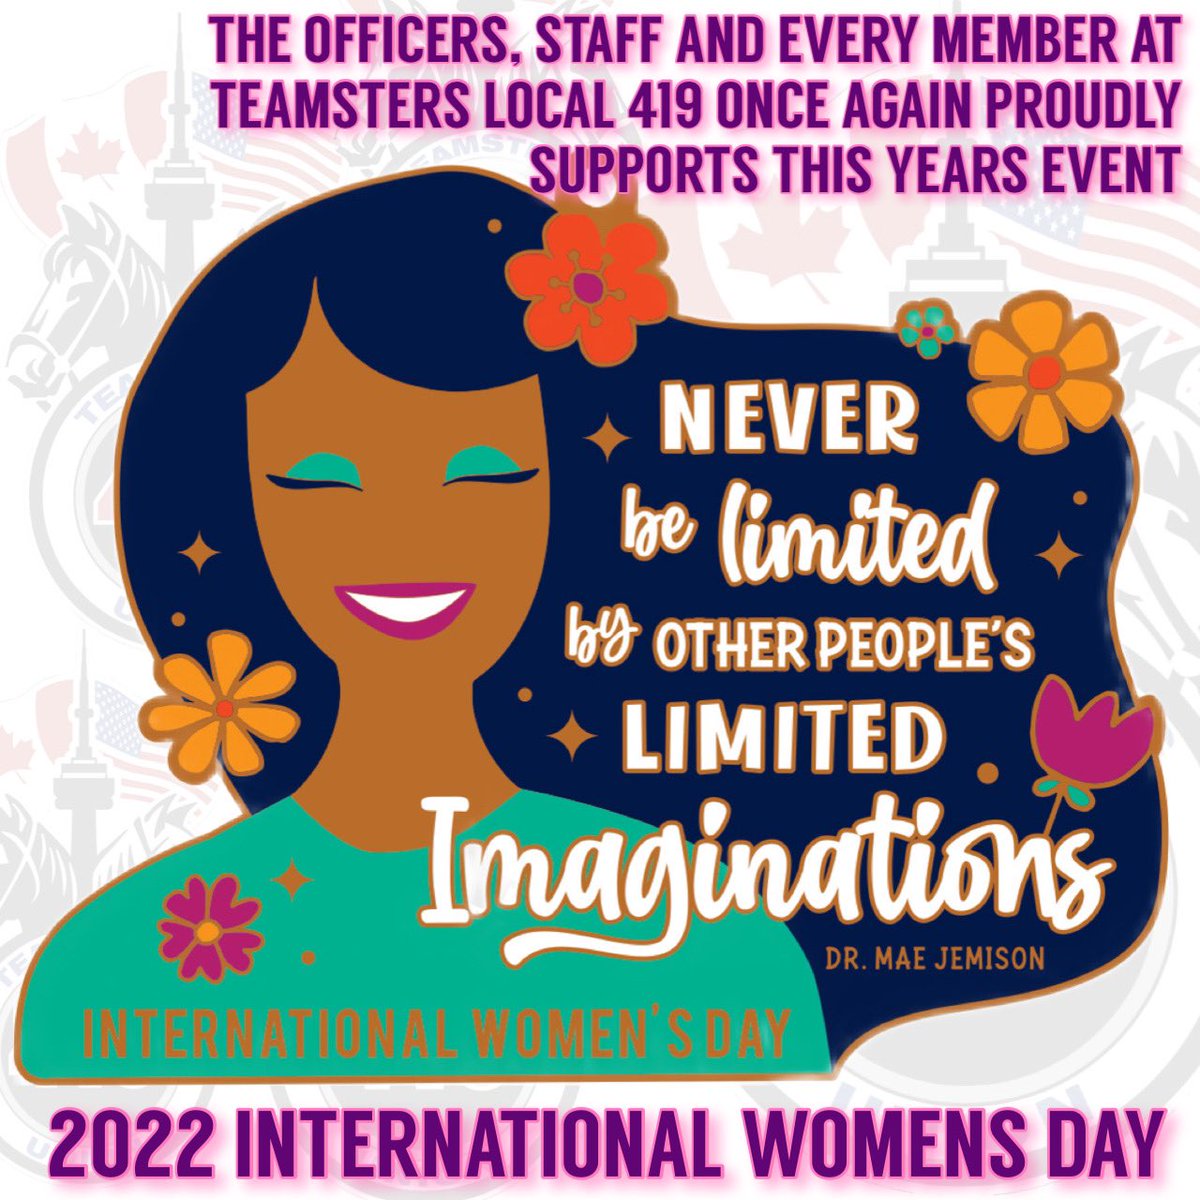 Today, Peel Region is celebrating International Womens Day, Teamsters Local 419 has proudly supported this event for the last 10 years. It’s come a long way from the first one… 

Have a great event Sisters!!!

#InternationalWomensDay202#TeamstersWomenAreBeautiful #IWDPeel